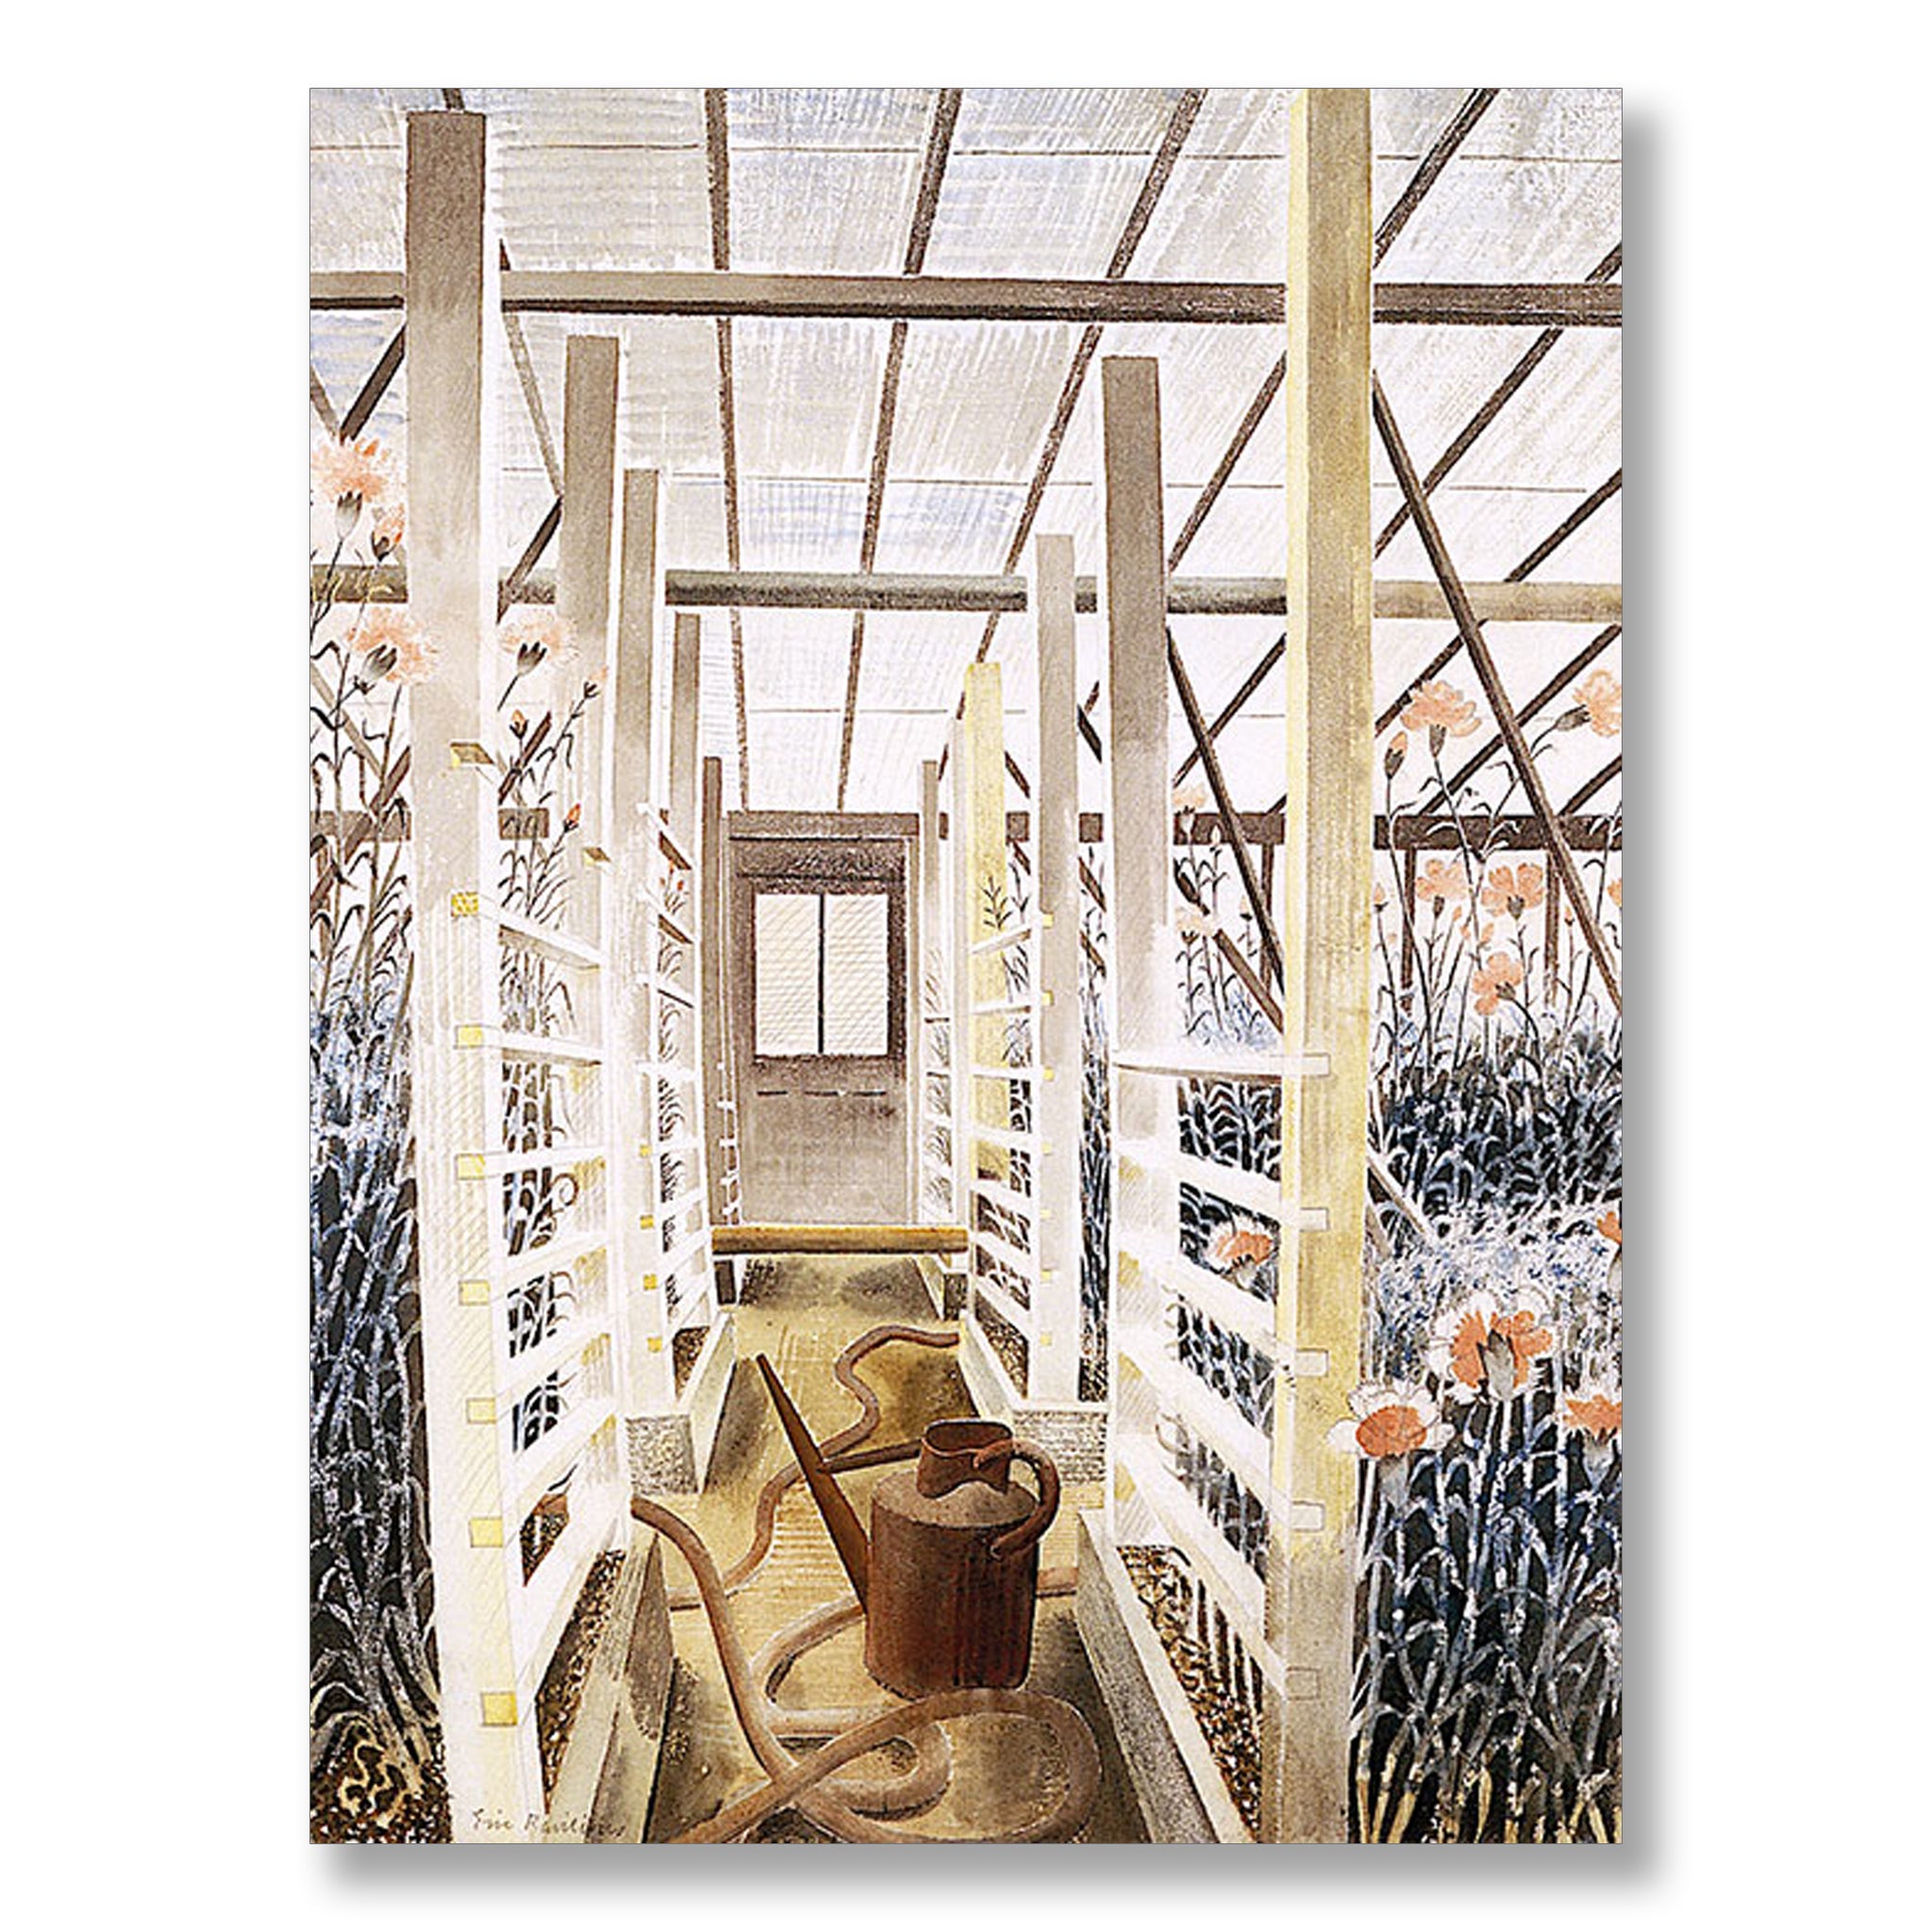 The Carnation House by Eric Ravilious